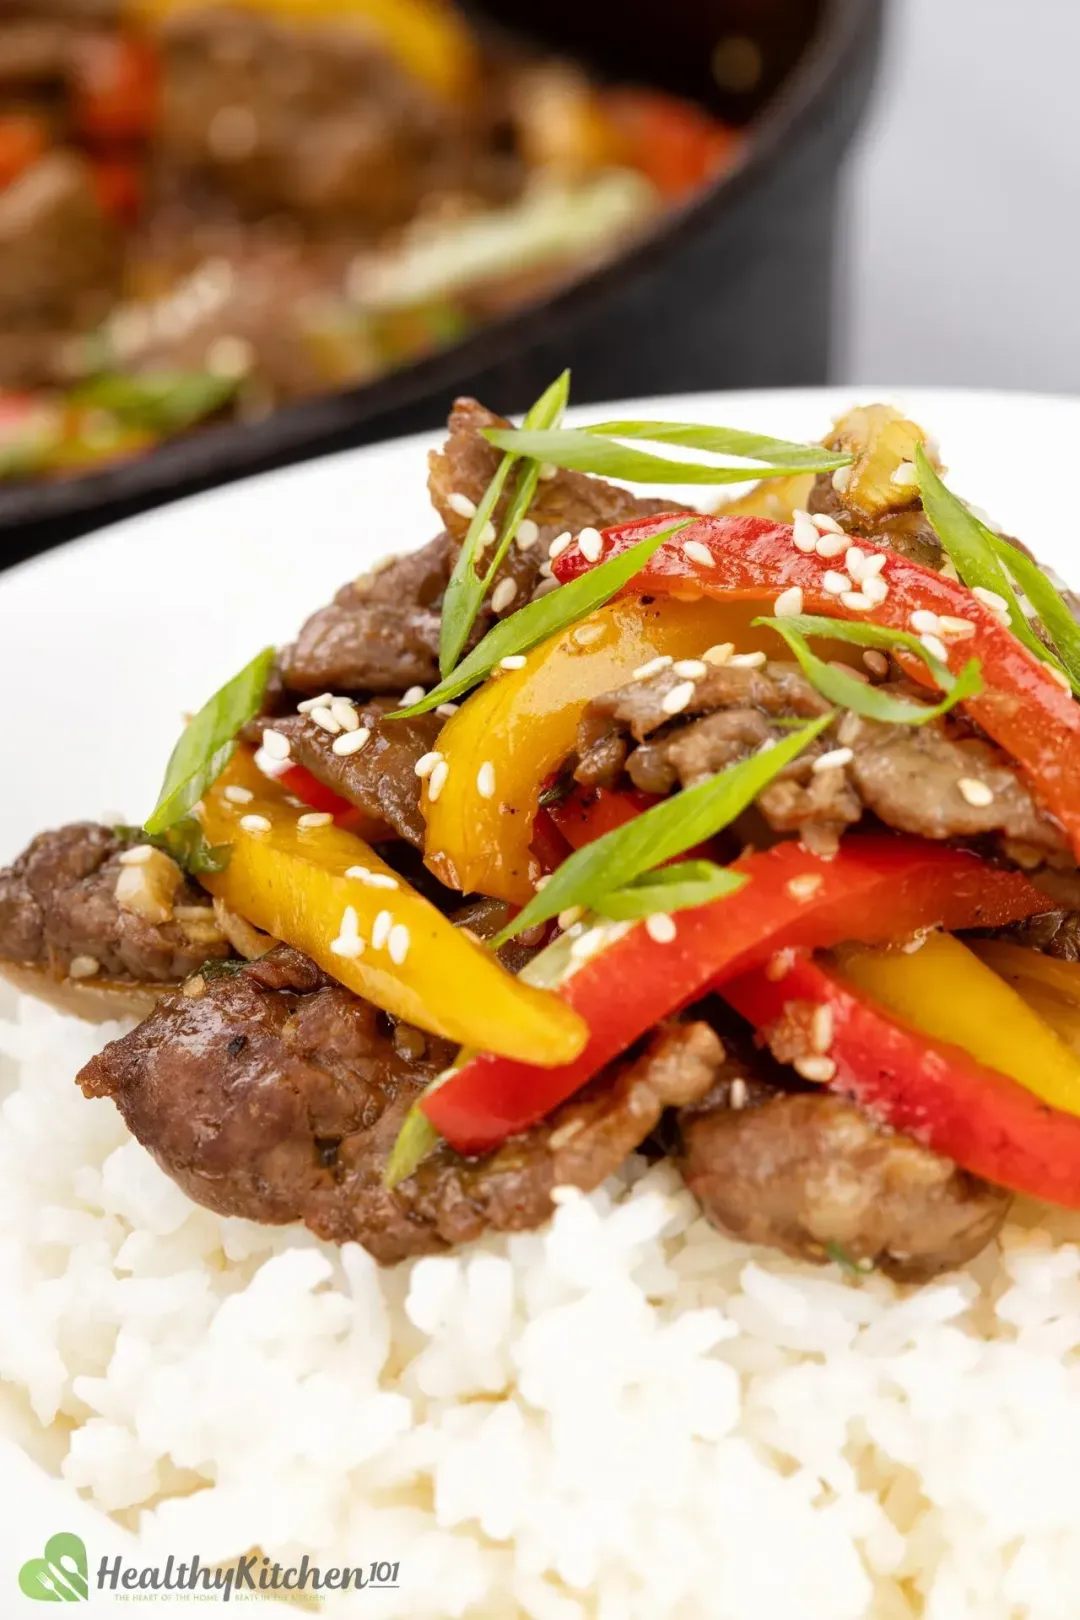 Healthy Pepper Steak Recipe - Your Favorite Takeout Made At Home